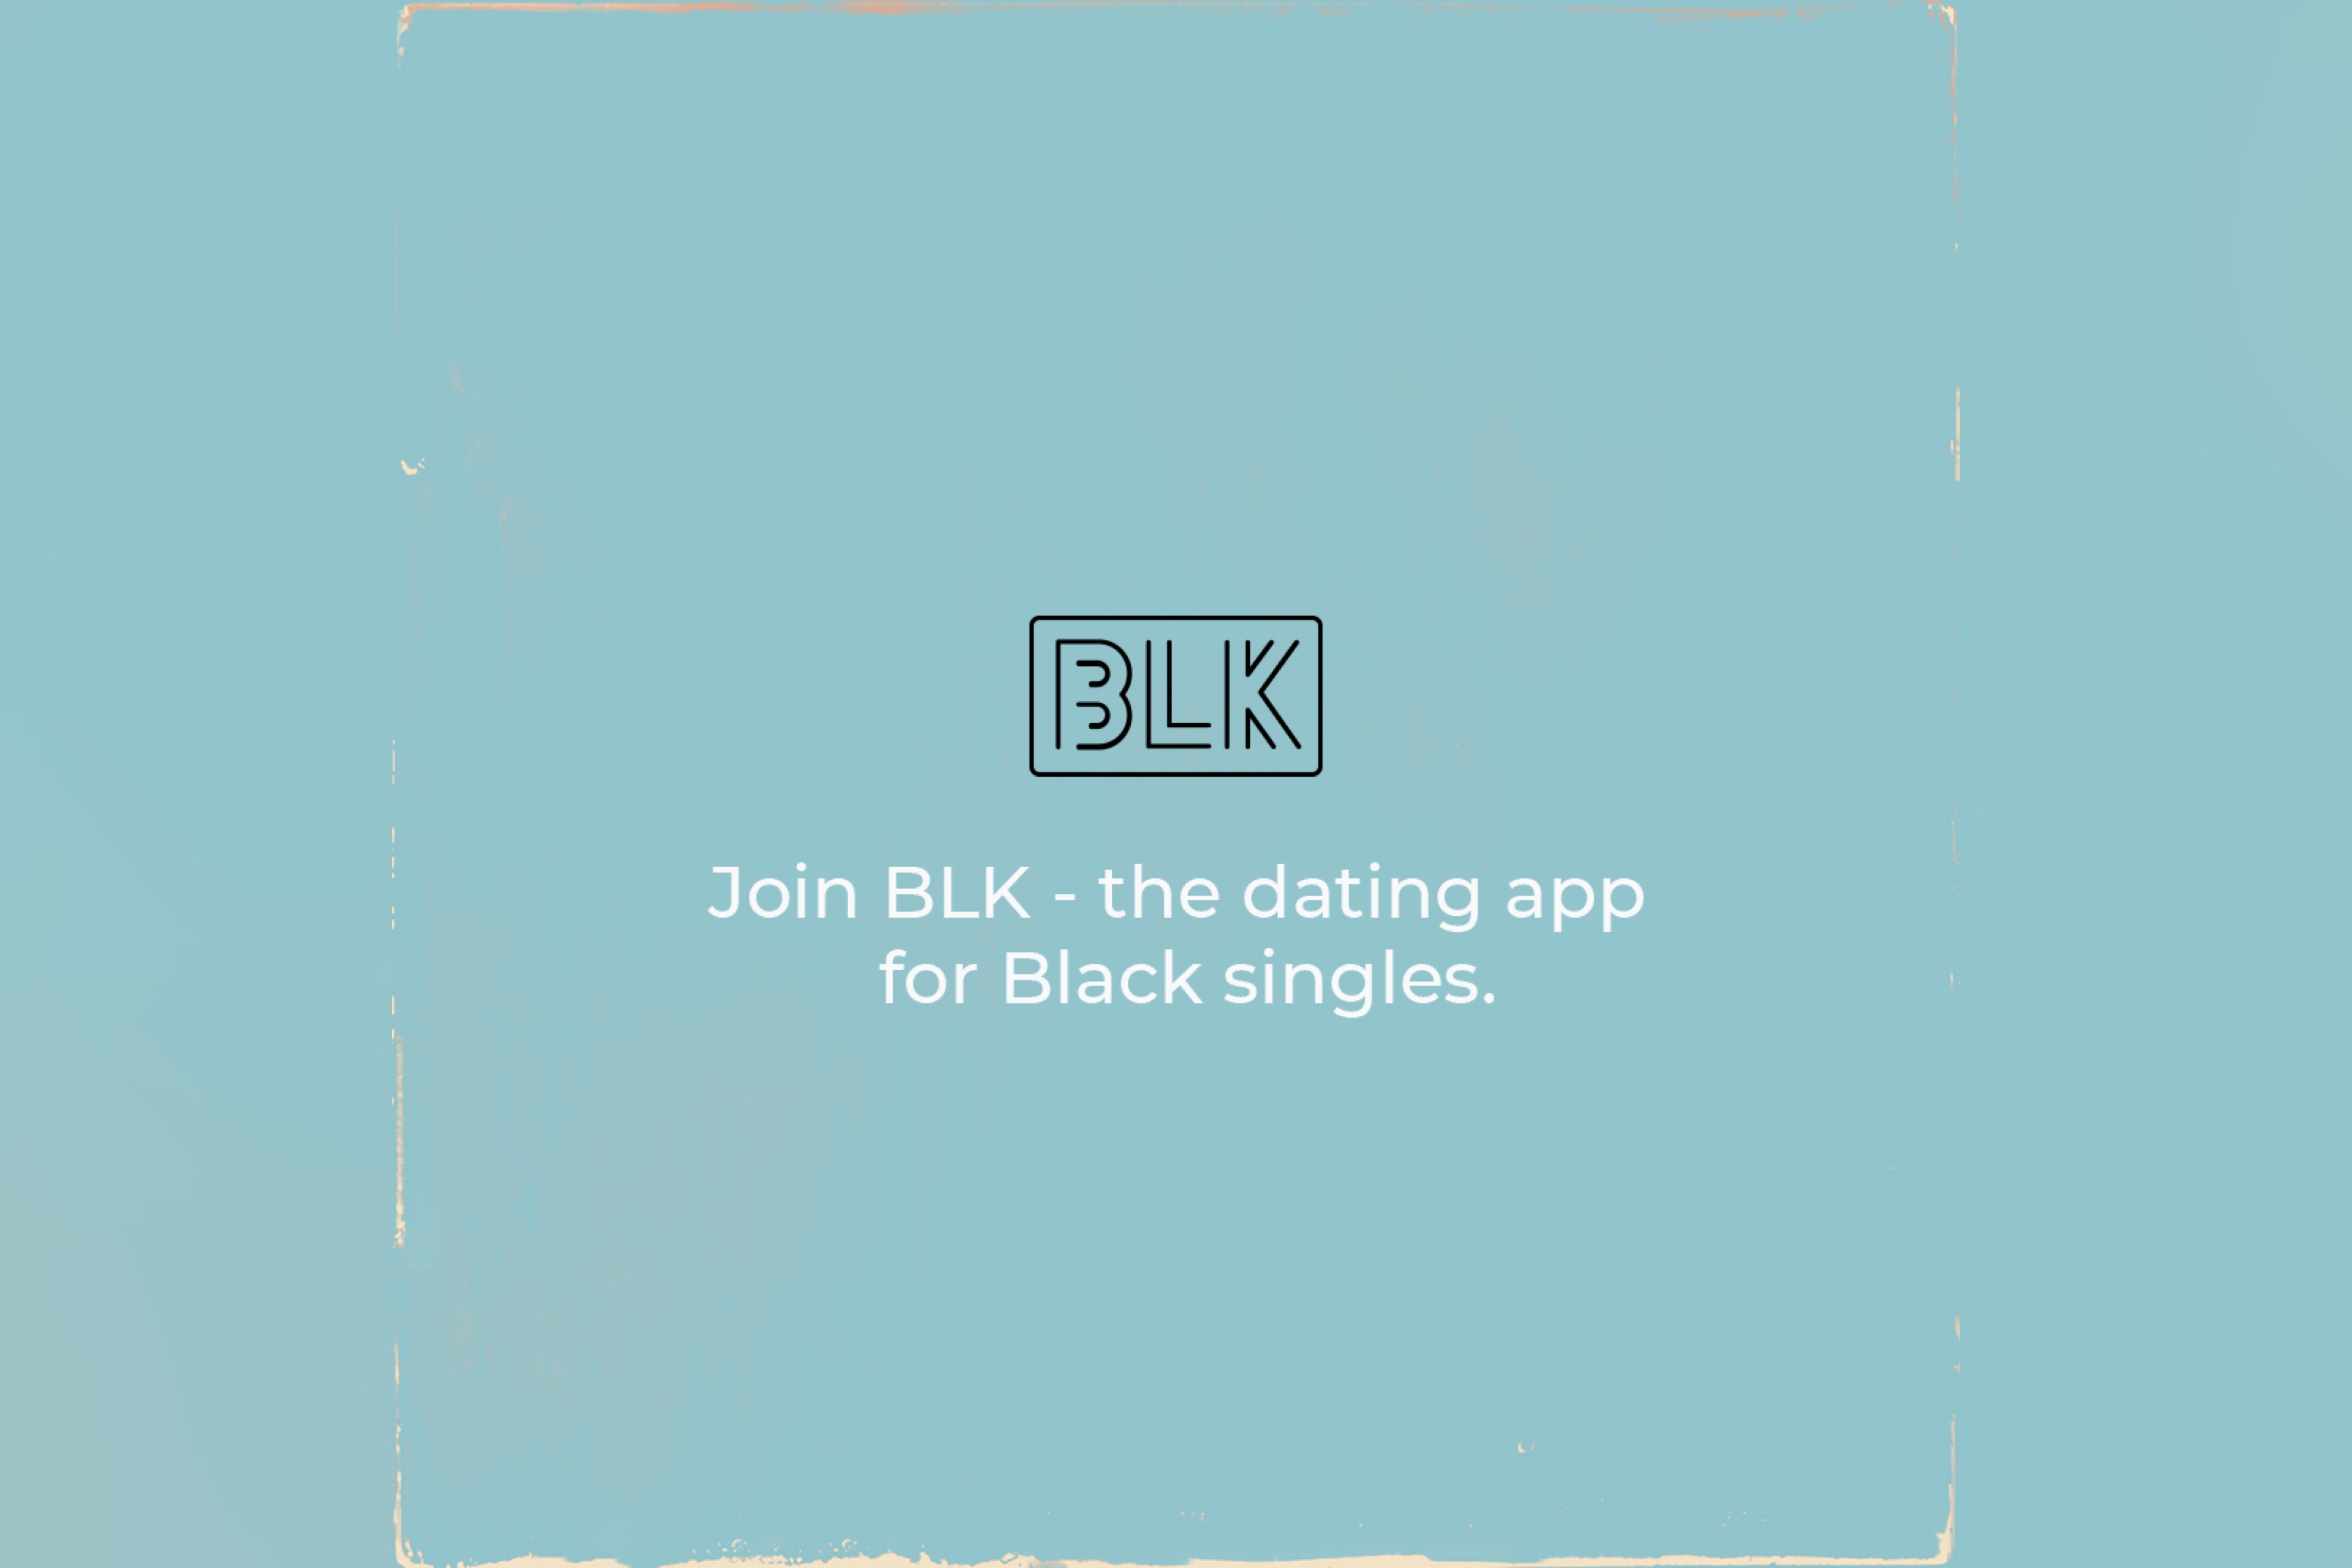 BLK's 'Once You Go BLK' Campaign Highlights the Beauty of Black Love